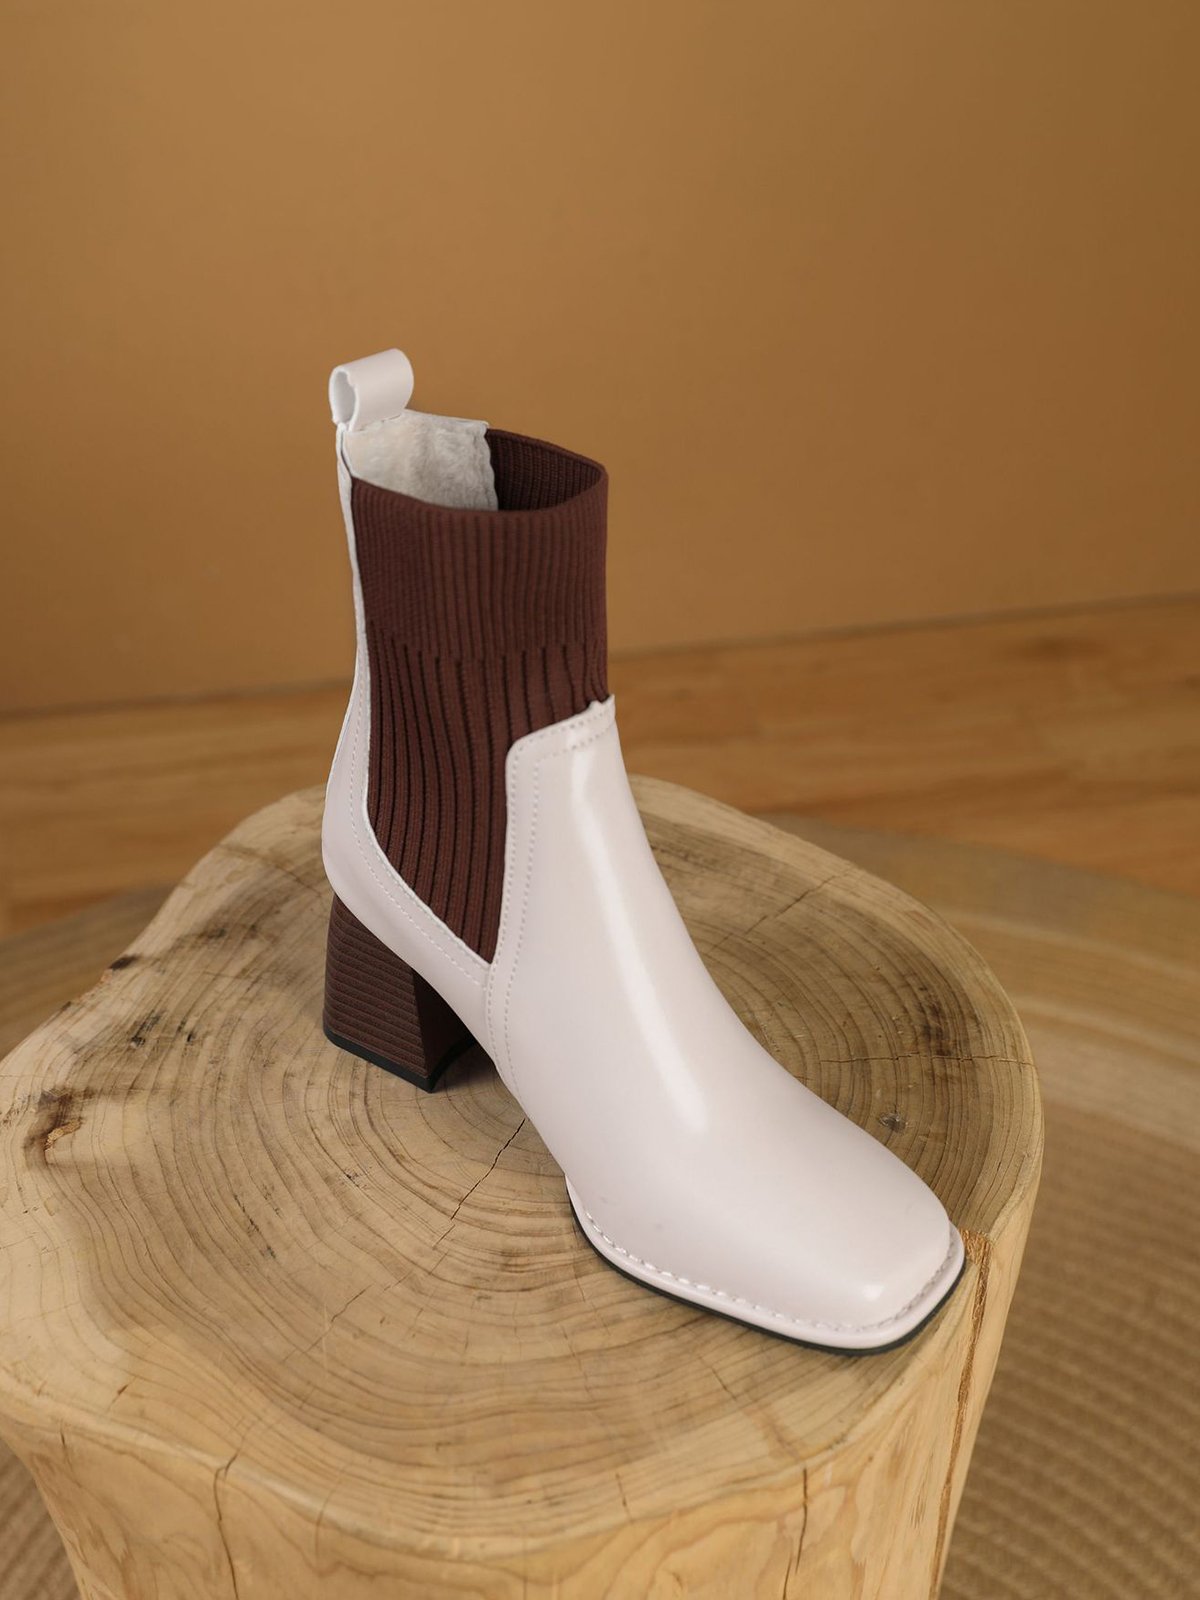 Color-block Knitted Paneled Square Toe Block Heel Slip On Chelsea Boots